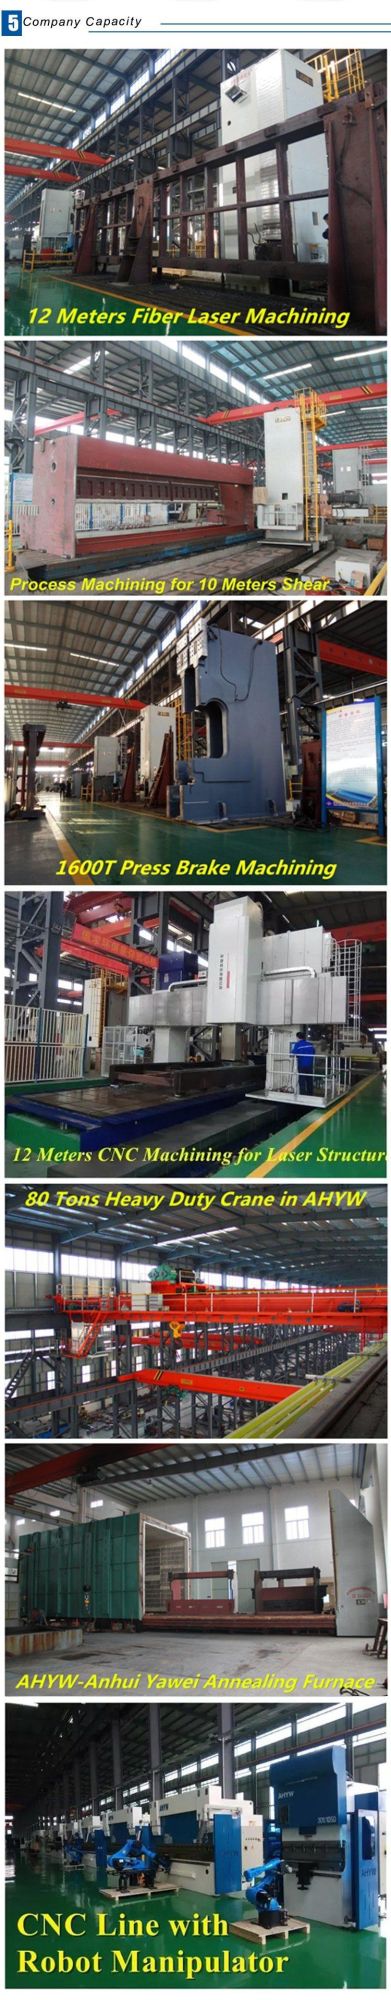 Hydraulic CNC Automatic Shearing Machine for Sale with Esa Controller